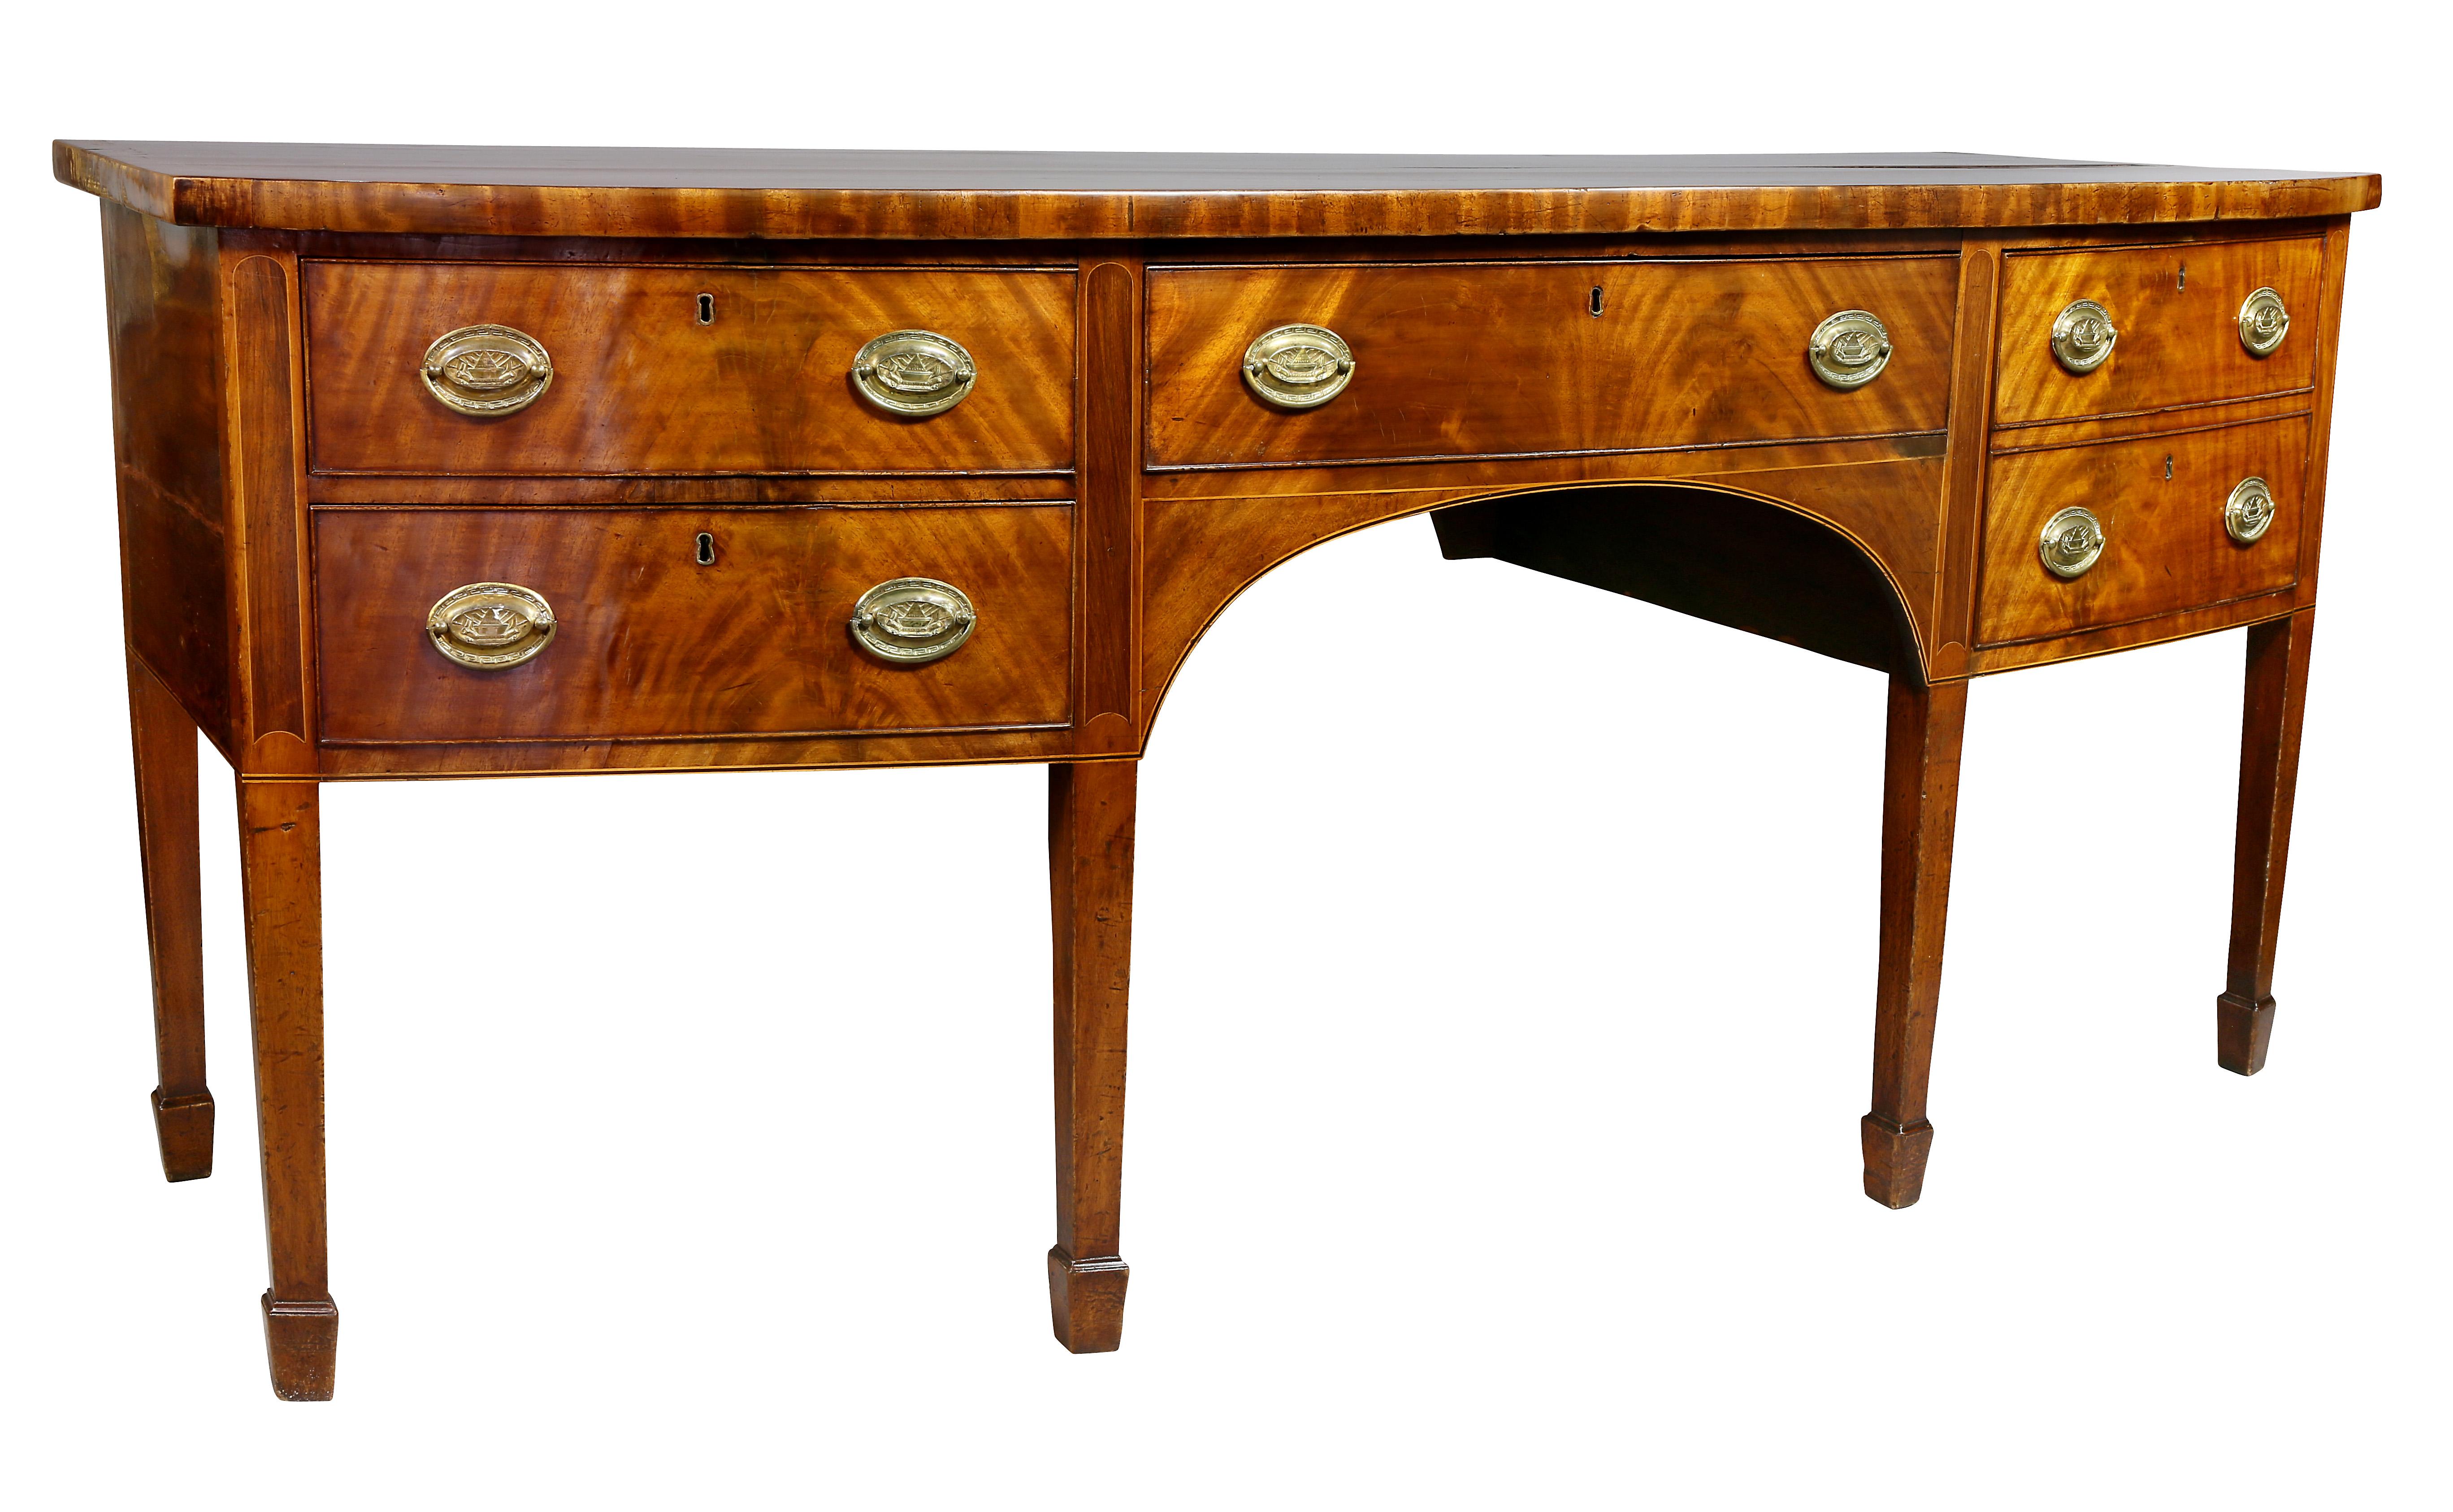 Bow front with banded edge over a central drawer flanked by a bottle drawer and two small drawers raised on square tapered legs, spade feet.